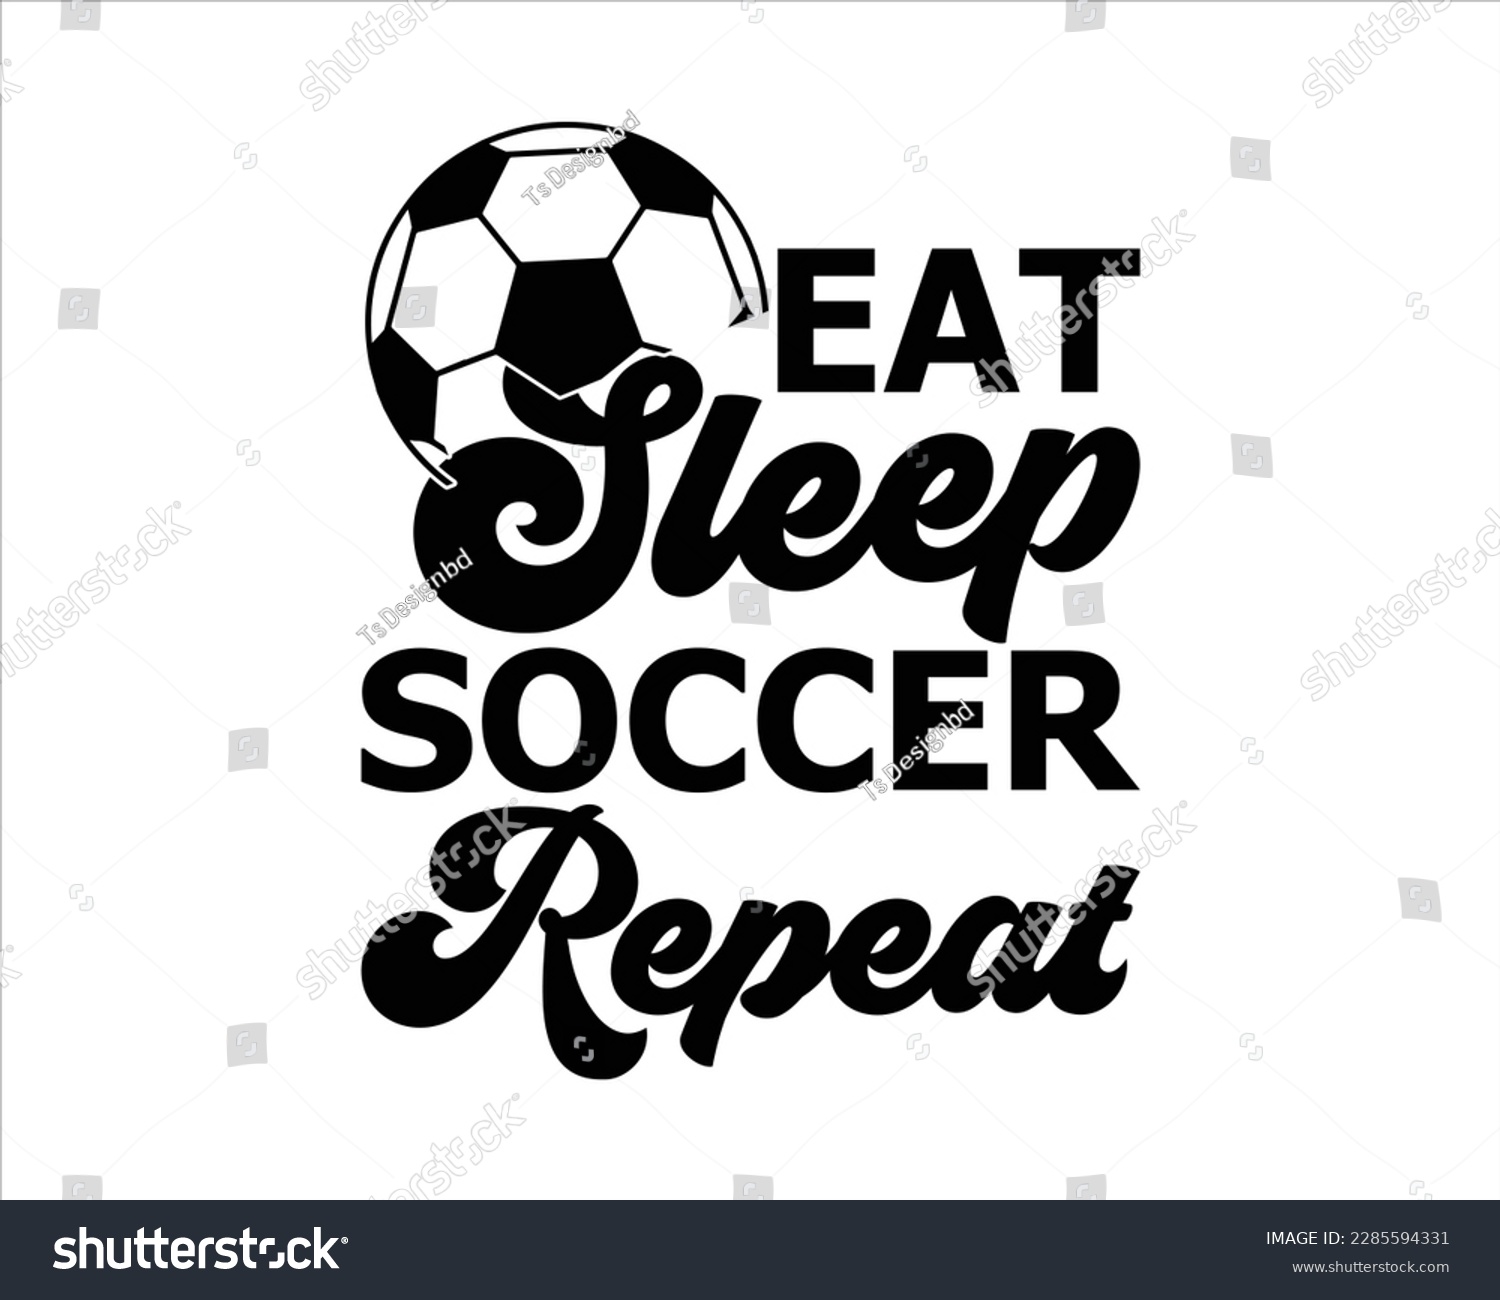 SVG of Eat Sleep Soccer Repeat Svg design,Soccer Mom Svg,Soccer Mom Life Svg,FootBall Svg,Soccer Ball Svg,Soccer Clipart,Sports, Cut File Cricut,Game Day Svg,Proud Soccer Svg,Soccer Quote Svg, Soccer Saying  svg